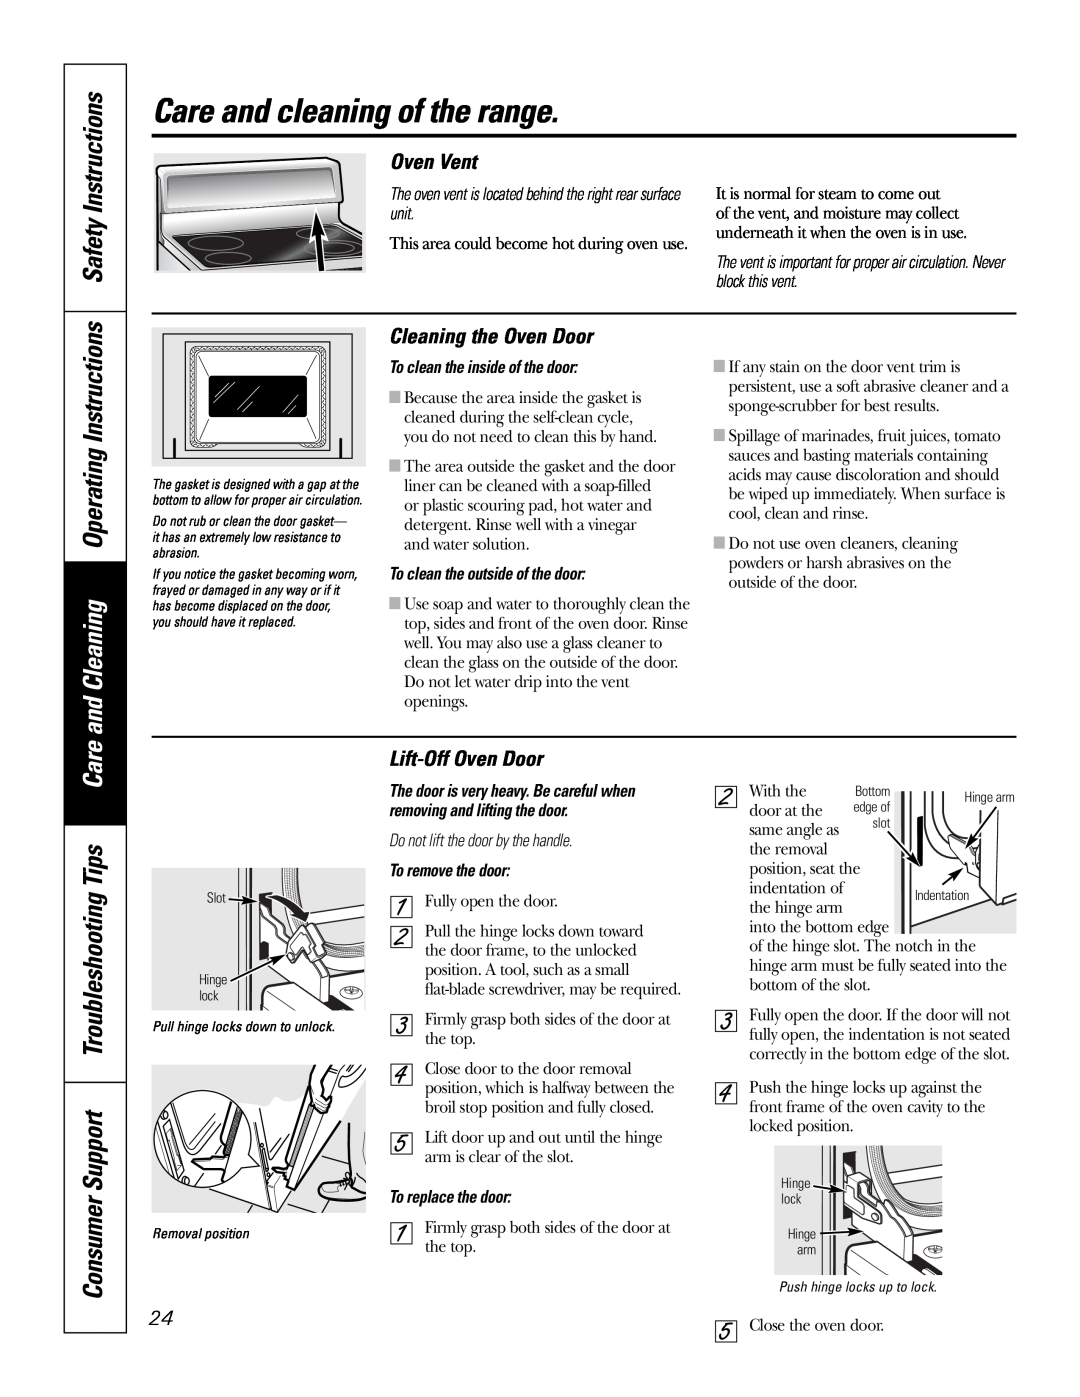 GE JB670 and Cleaning Operating Instructions, Consumer Support Troubleshooting Tips Care, Oven Vent, Lift-Off Oven Door 